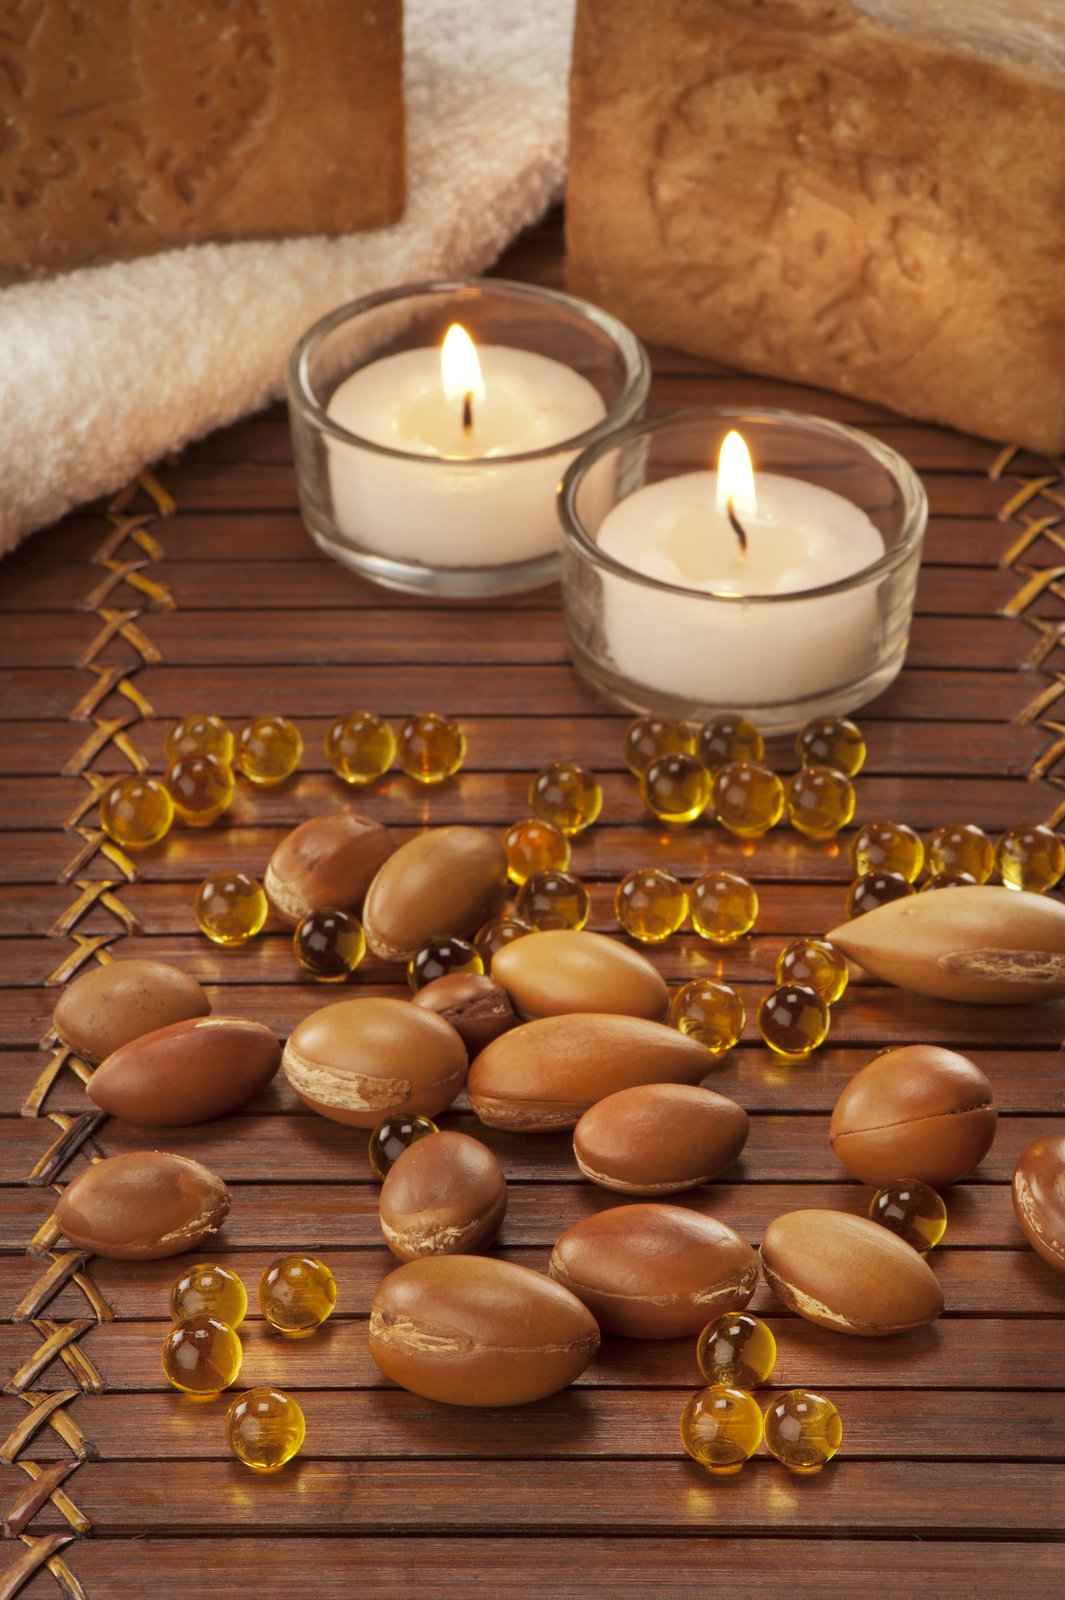 bigstock-Seeds-Of-Argan-With-Light-And-4